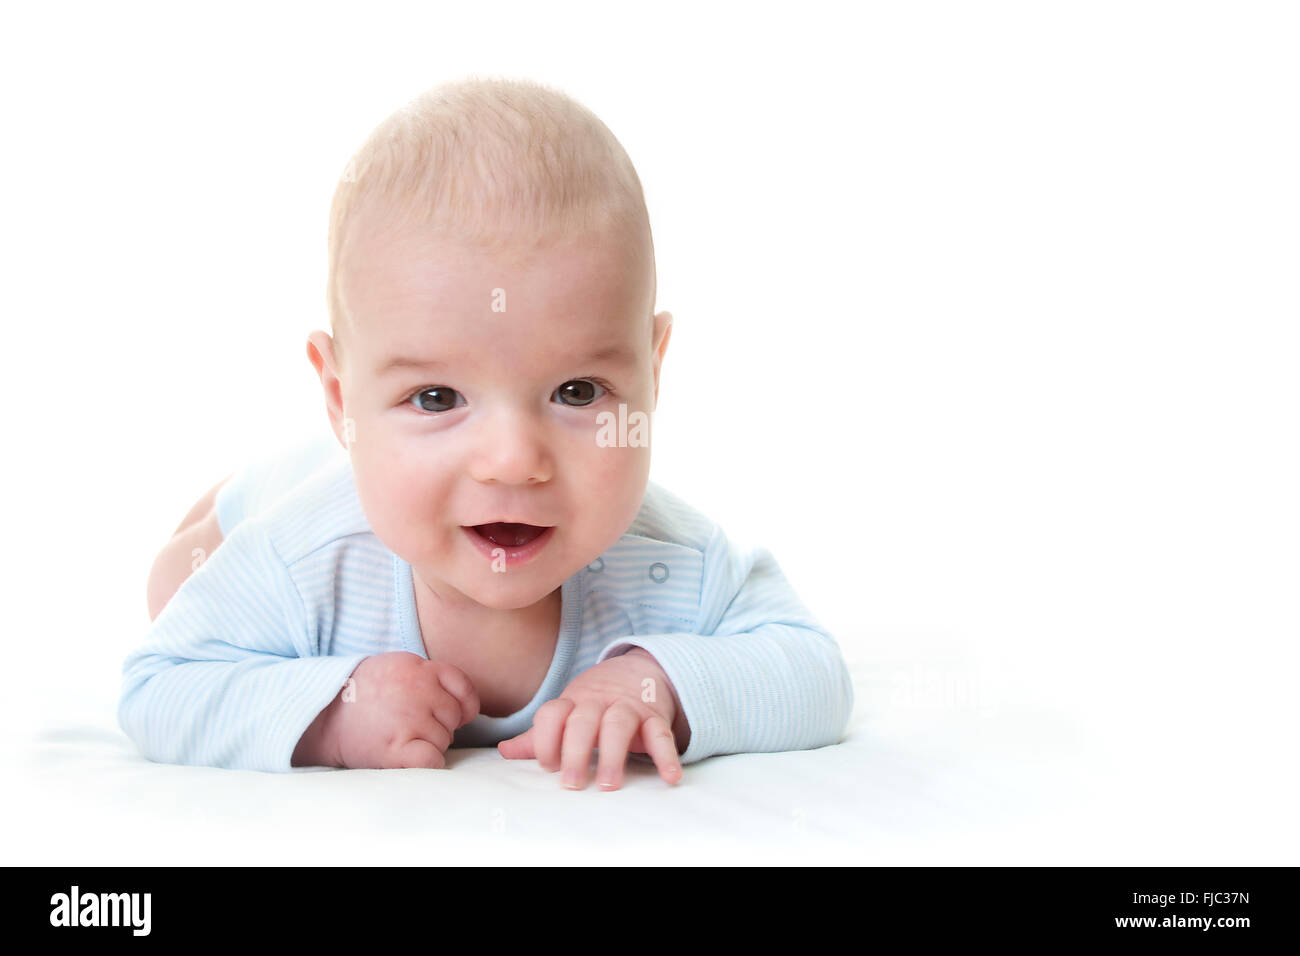 three month old isolated baby Stock Photo